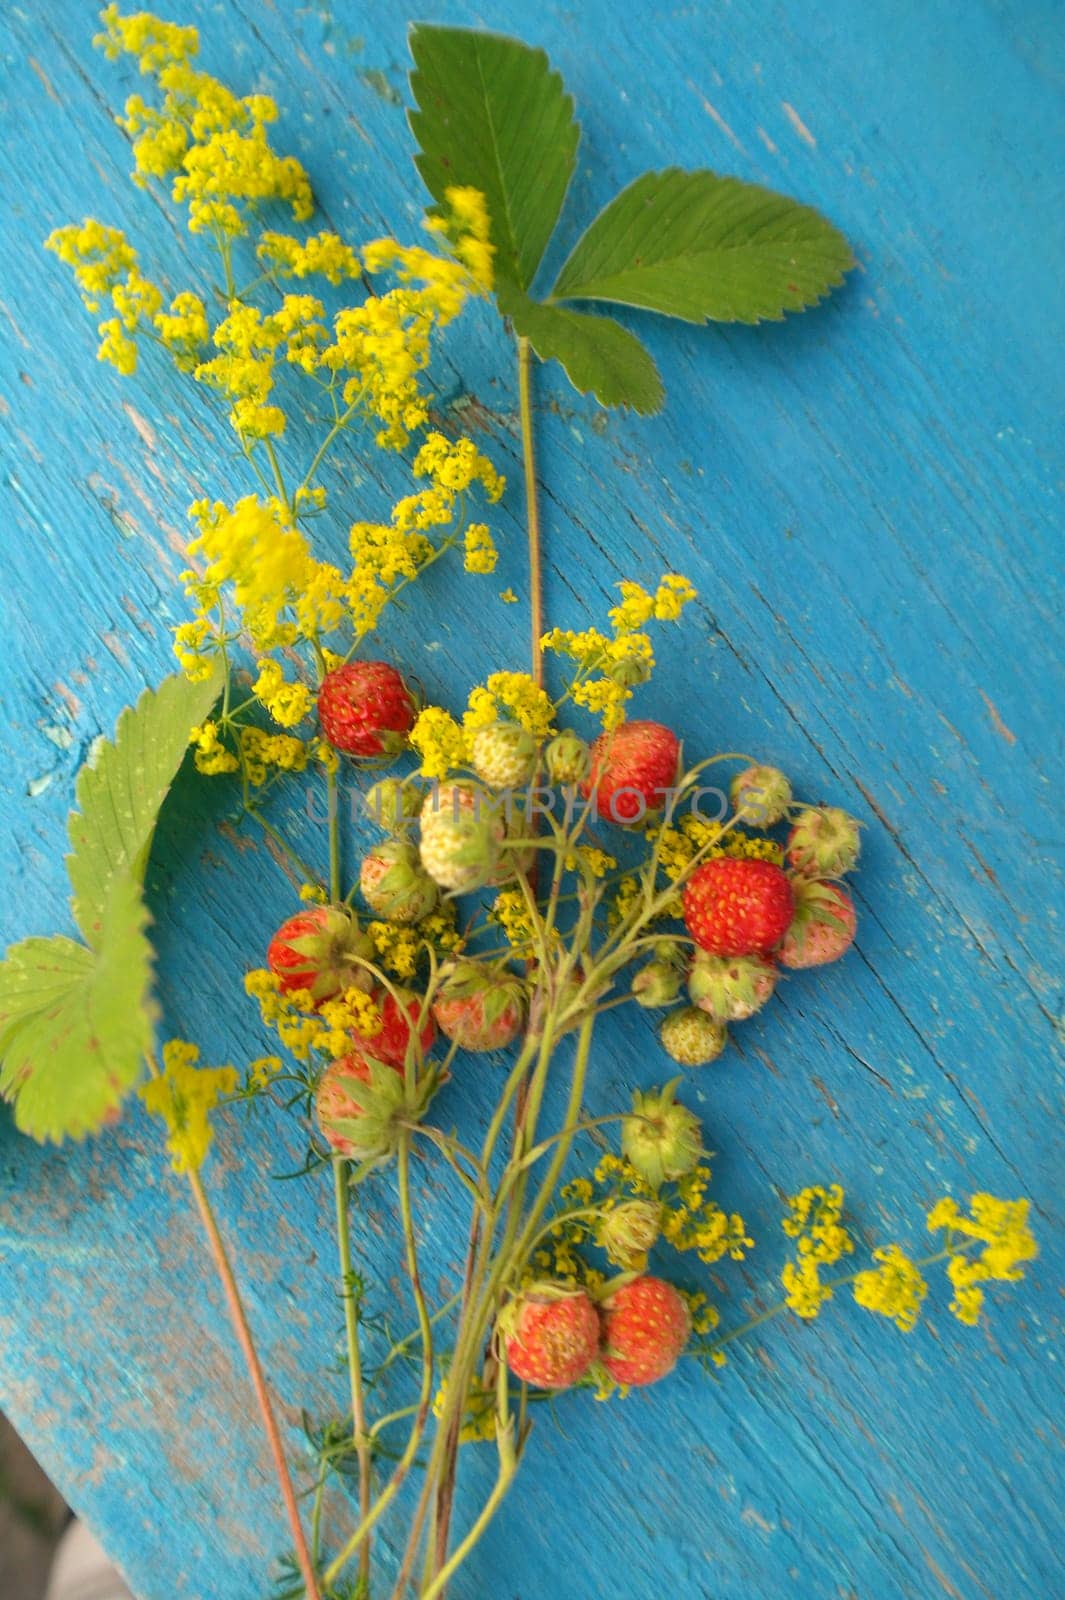 sprigs of wild strawberries on the background of the texture of aged blue wood blue wood